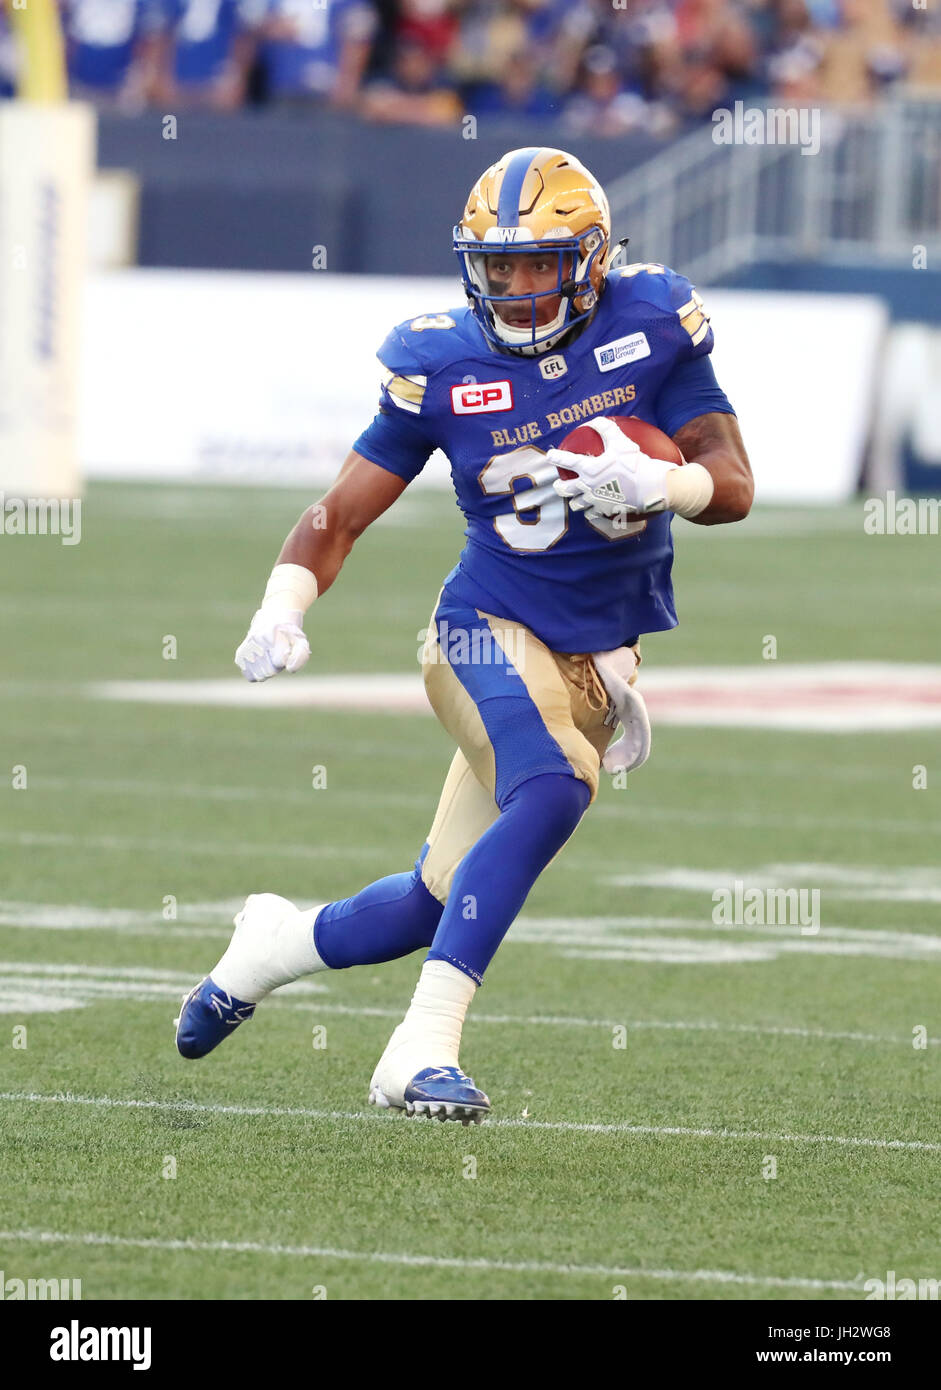 Winnipeg, Manitoba, CAN. 7th July, 2017. July 7, 2017; Winnipeg, Manitoba, CAN; Winnipeg Blue Bombers running back Andrew Harris (33) prepares his run back during the first half against the Calgary Stampeders at Investors Group Field. Mandatory Credit: Bruce Fedyck- Zuma Media Credit: Bruce Fedyck/ZUMA Wire/Alamy Live News Stock Photo